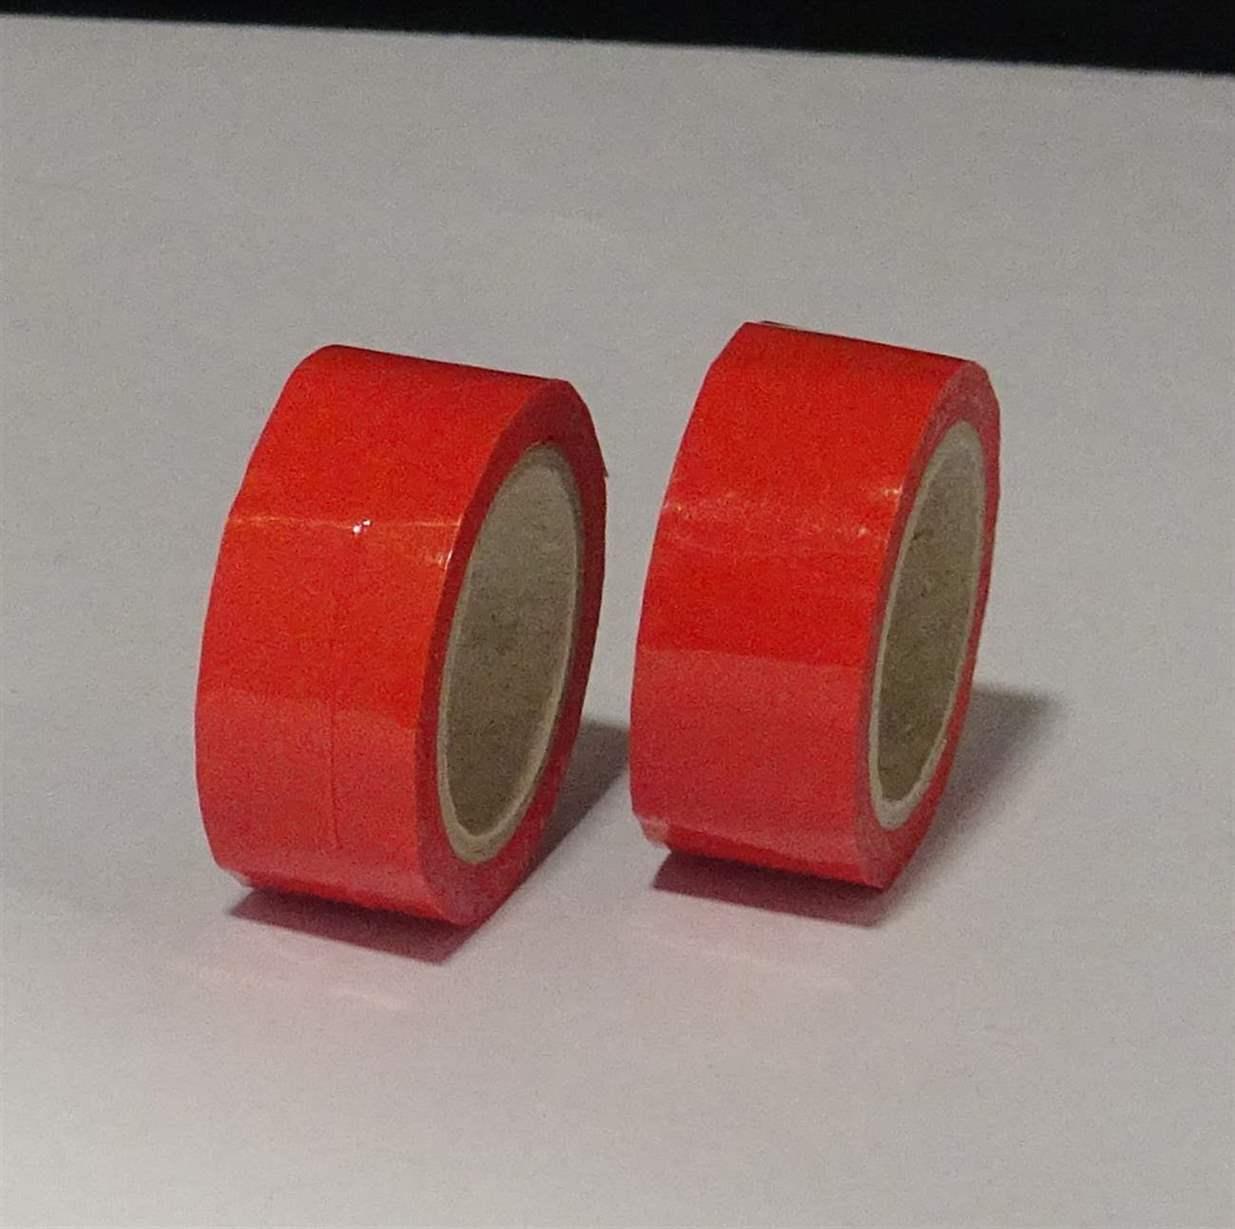 2 x RC Plane Glider SMALL red Wing Repair & Cover Tape Strength Colour EU Stock